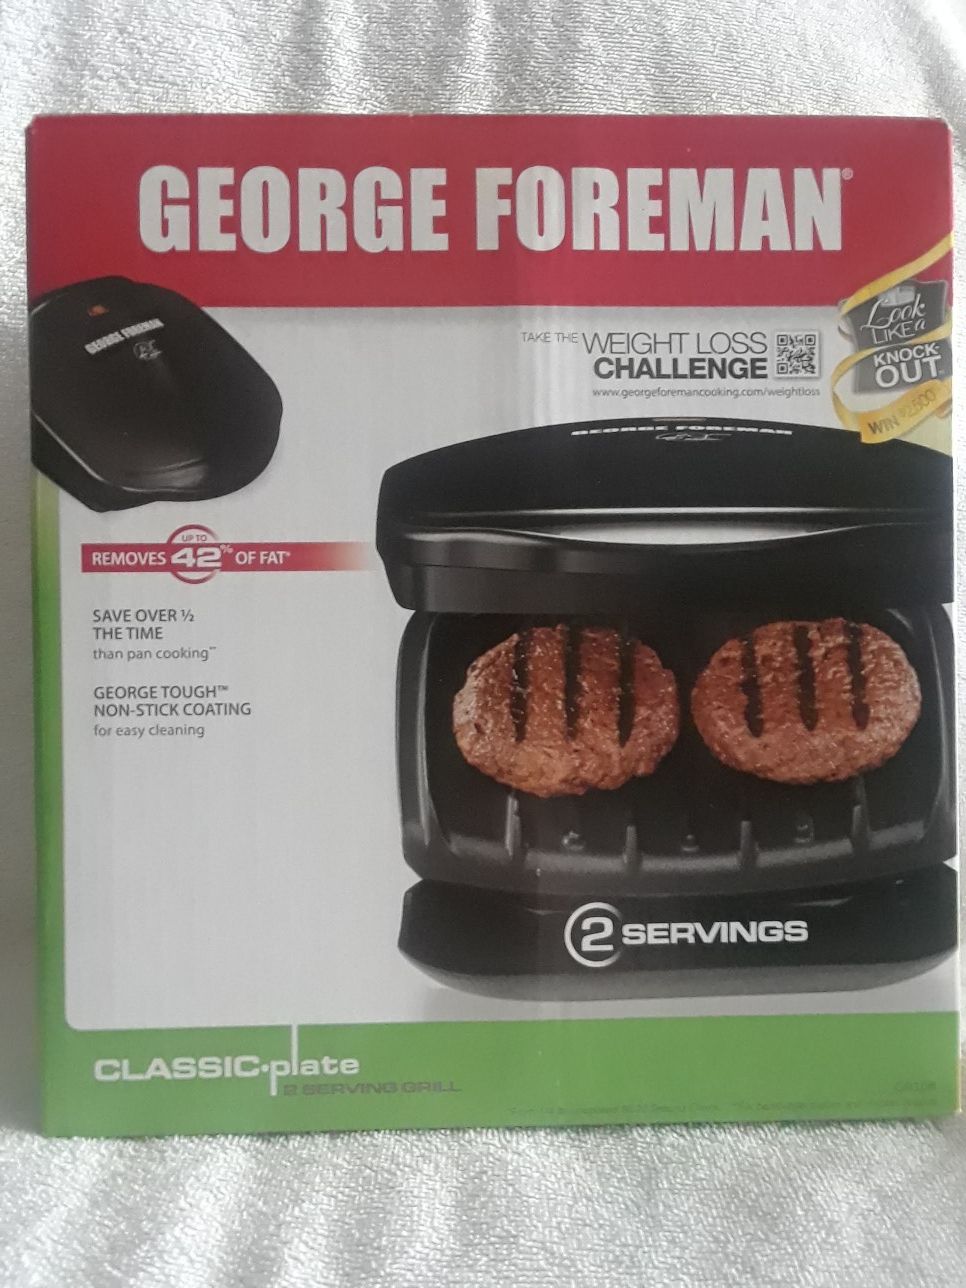 George Foreman 2 serving grill